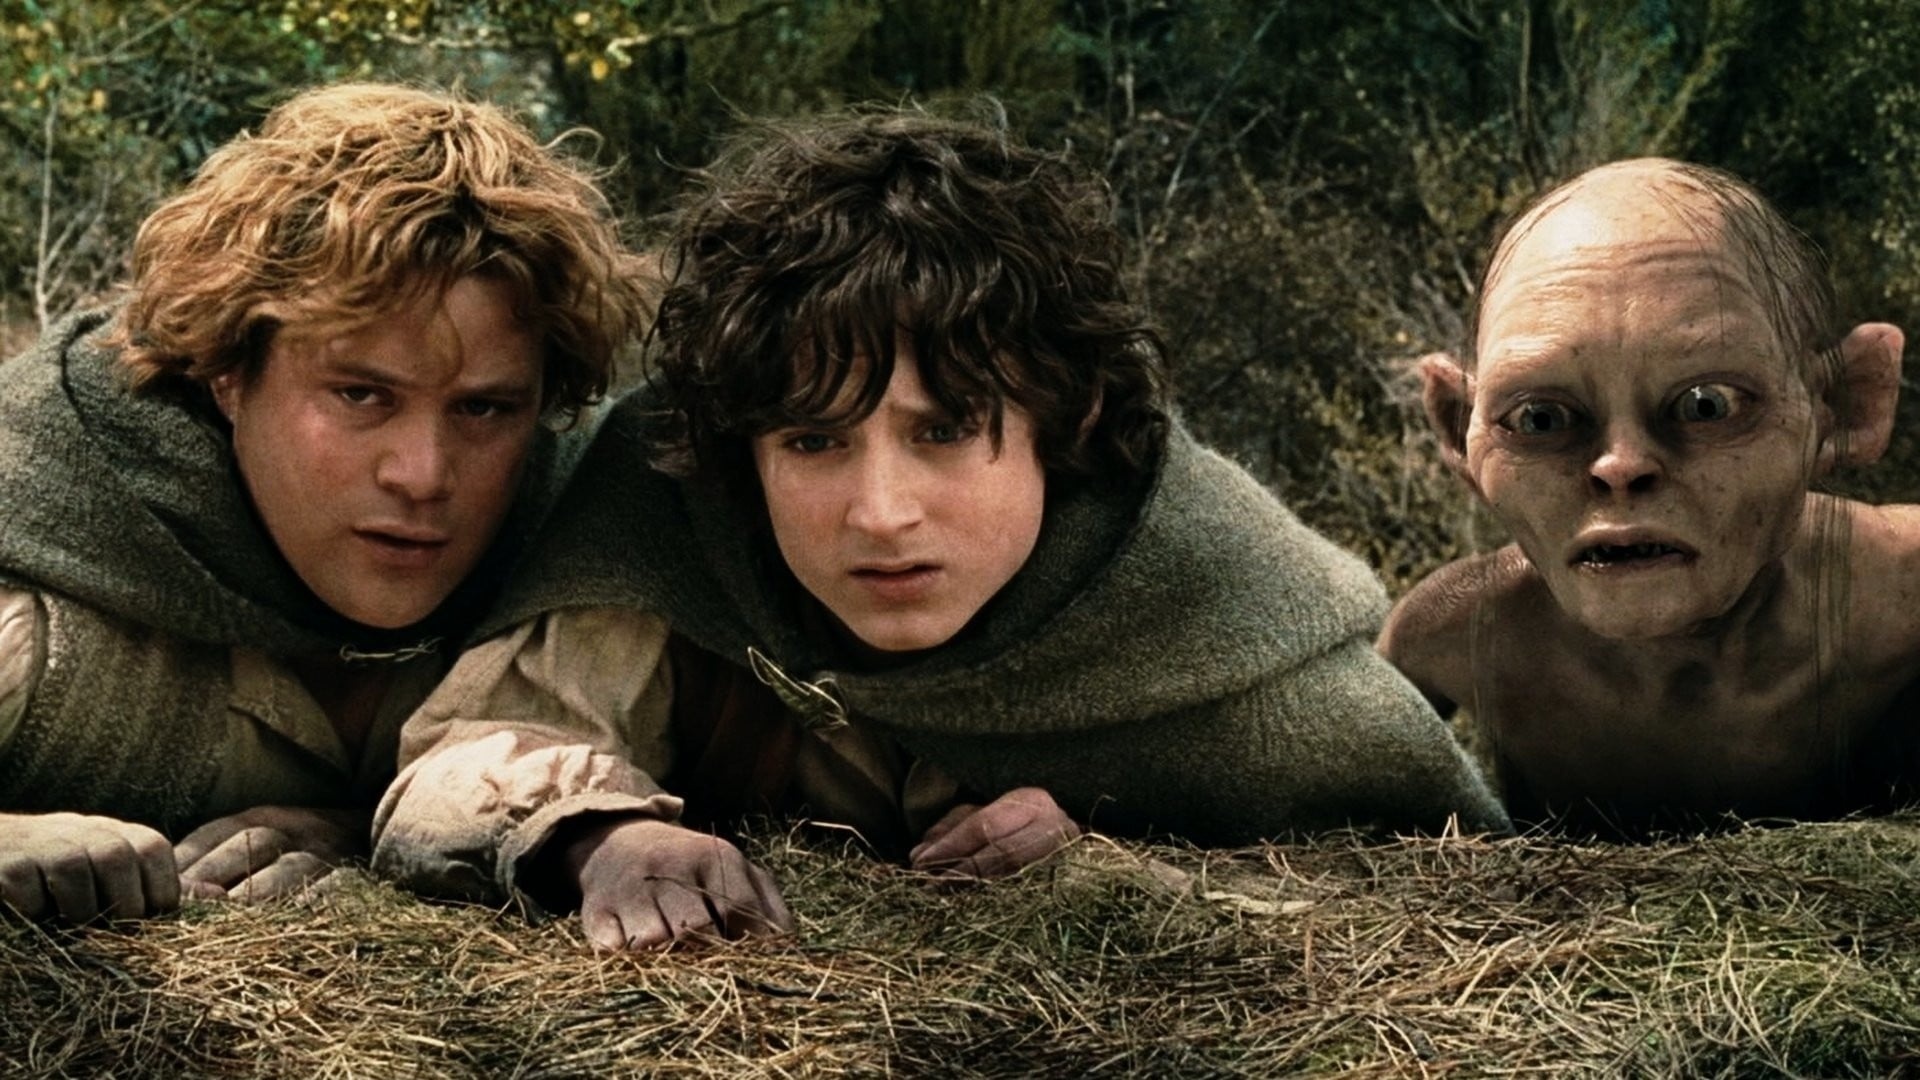 Hobbits, The Two Towers, Backdrops, Atmospheric scenery, 1920x1080 Full HD Desktop